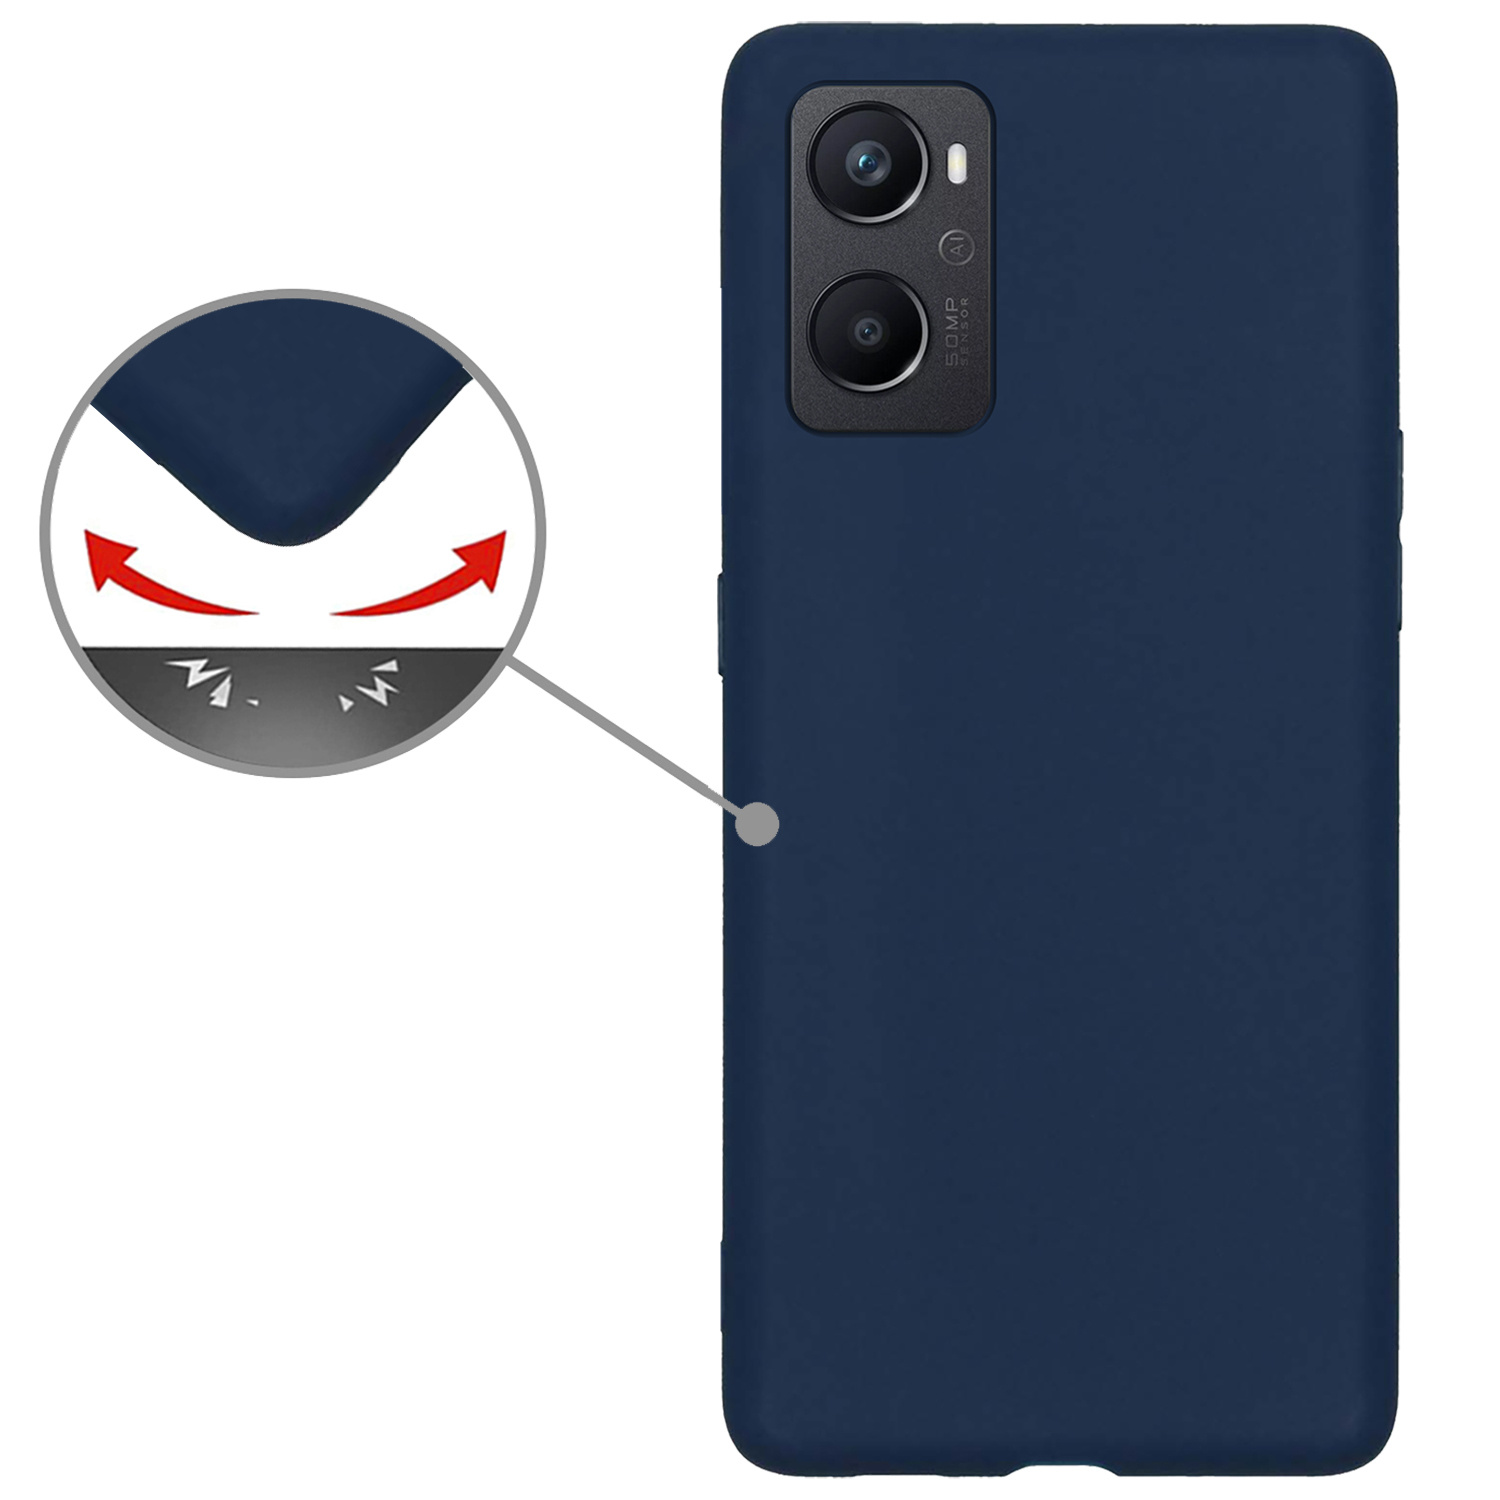 Nomfy OPPO A76 Hoesje Siliconen - OPPO A76 Hoesje Donker Blauw Case - OPPO A76 Cover Siliconen Back Cover - Donker Blauw 2 Stuks